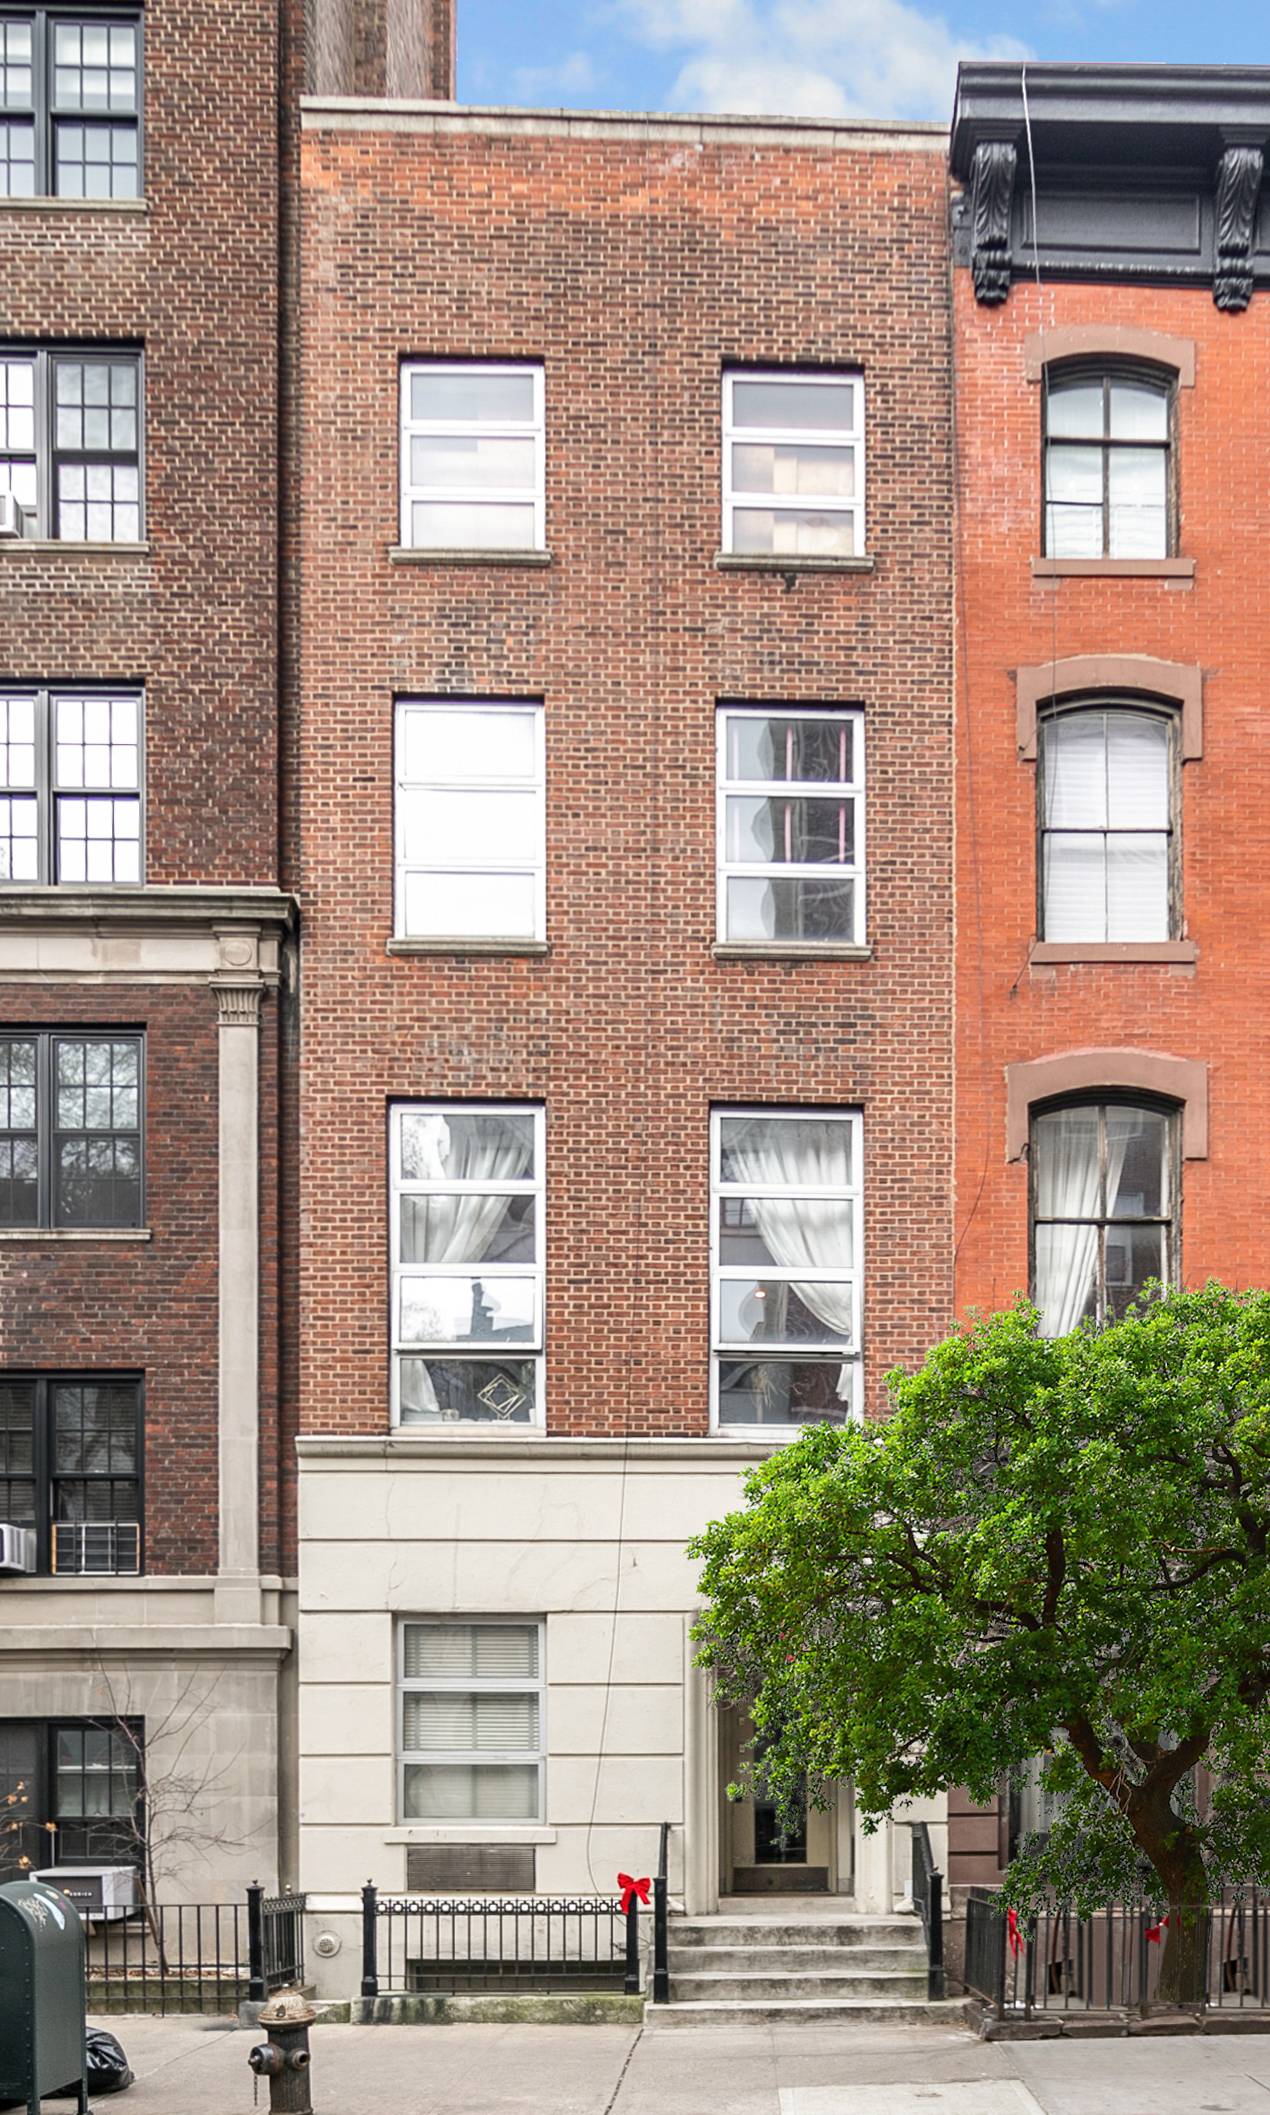 TOWNHOME IN GREENWICH VILLAGE Rare opportunity to purchase with the building next door to make a 35' wide single family or a boutique condo development with 8 12 units.